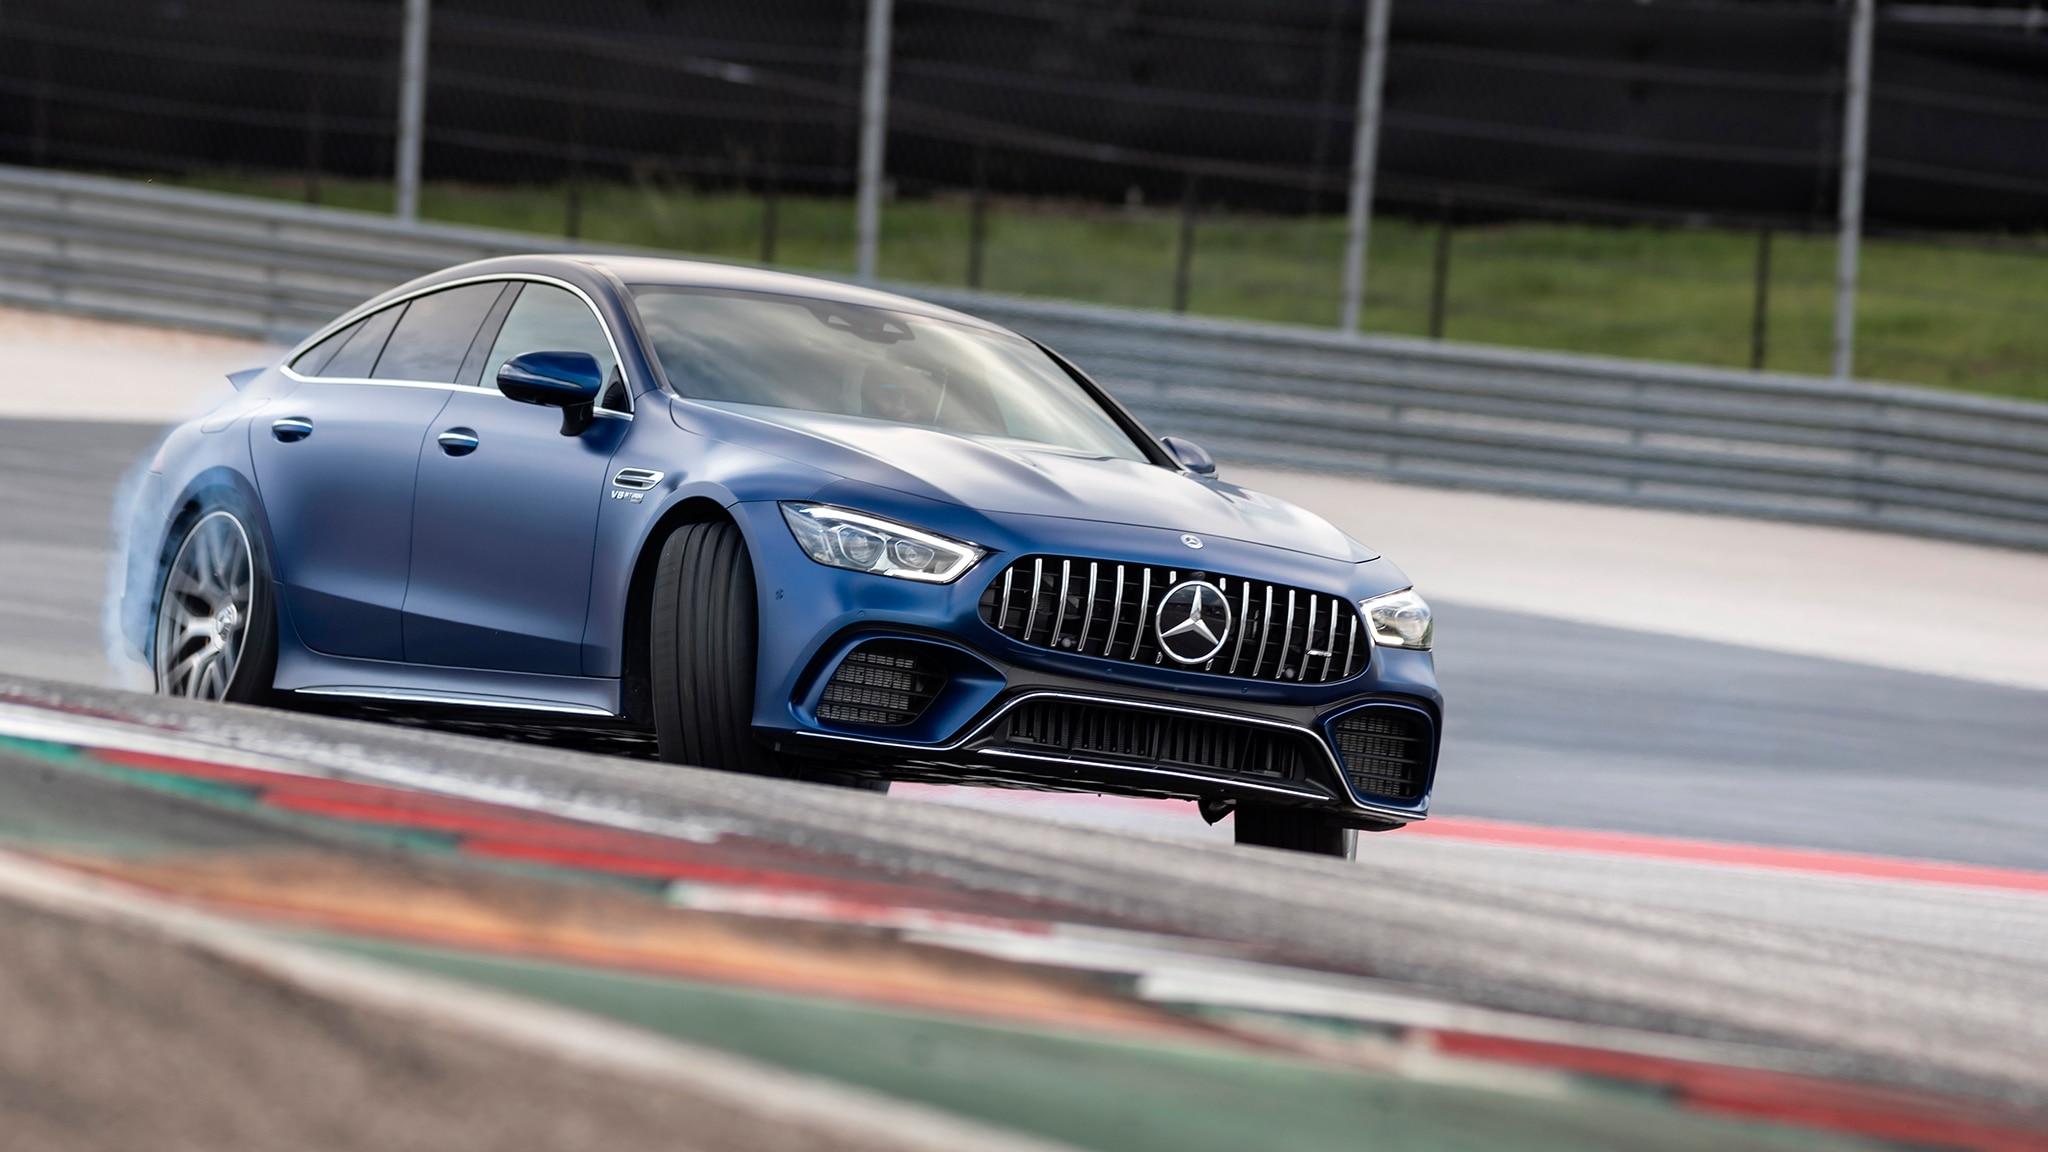 Mercedes AMG GT 4 Door First Drive Review. Automobile